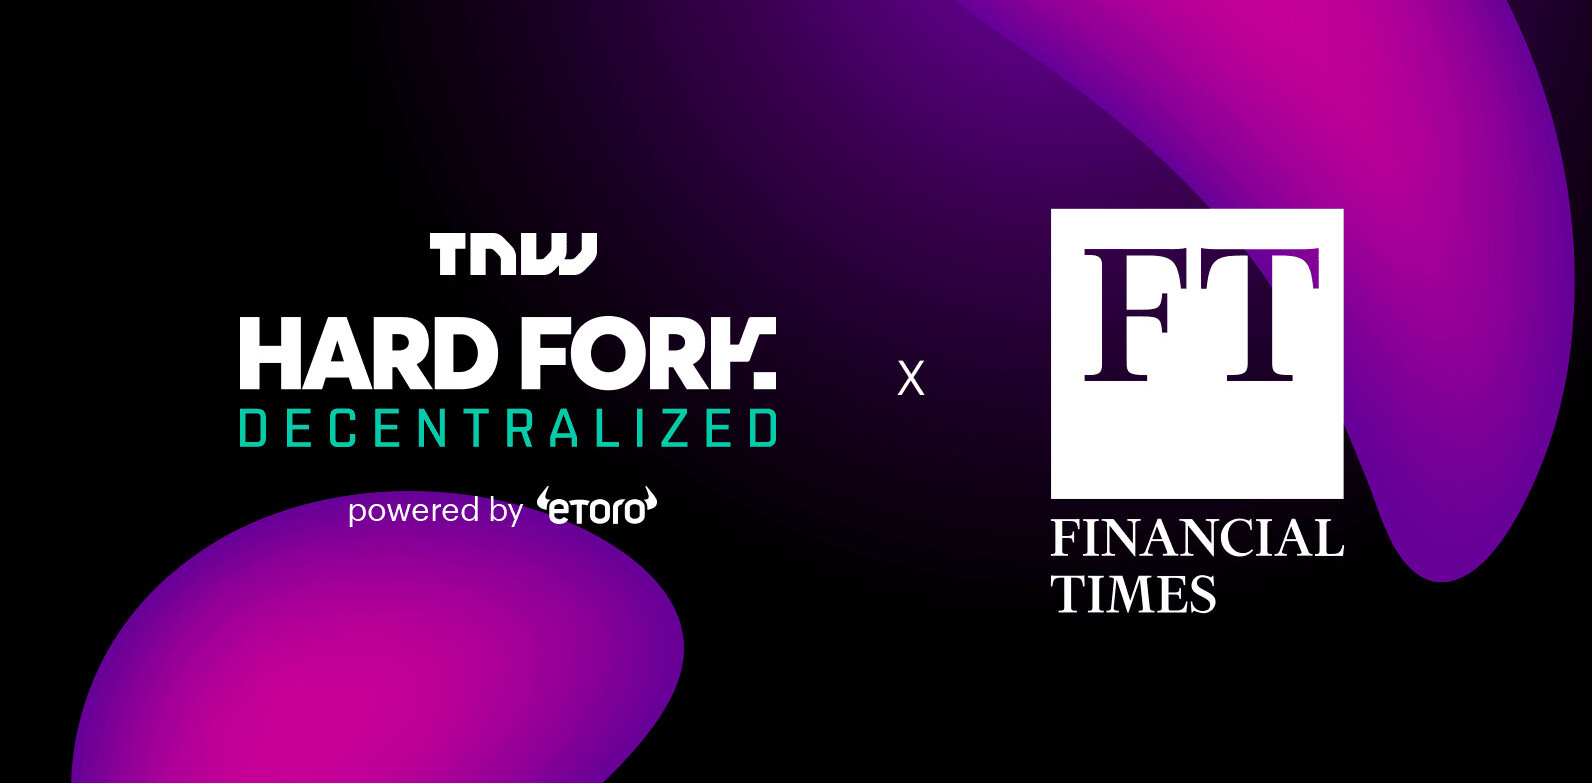 The Financial Times partners with Hard Fork Decentralized